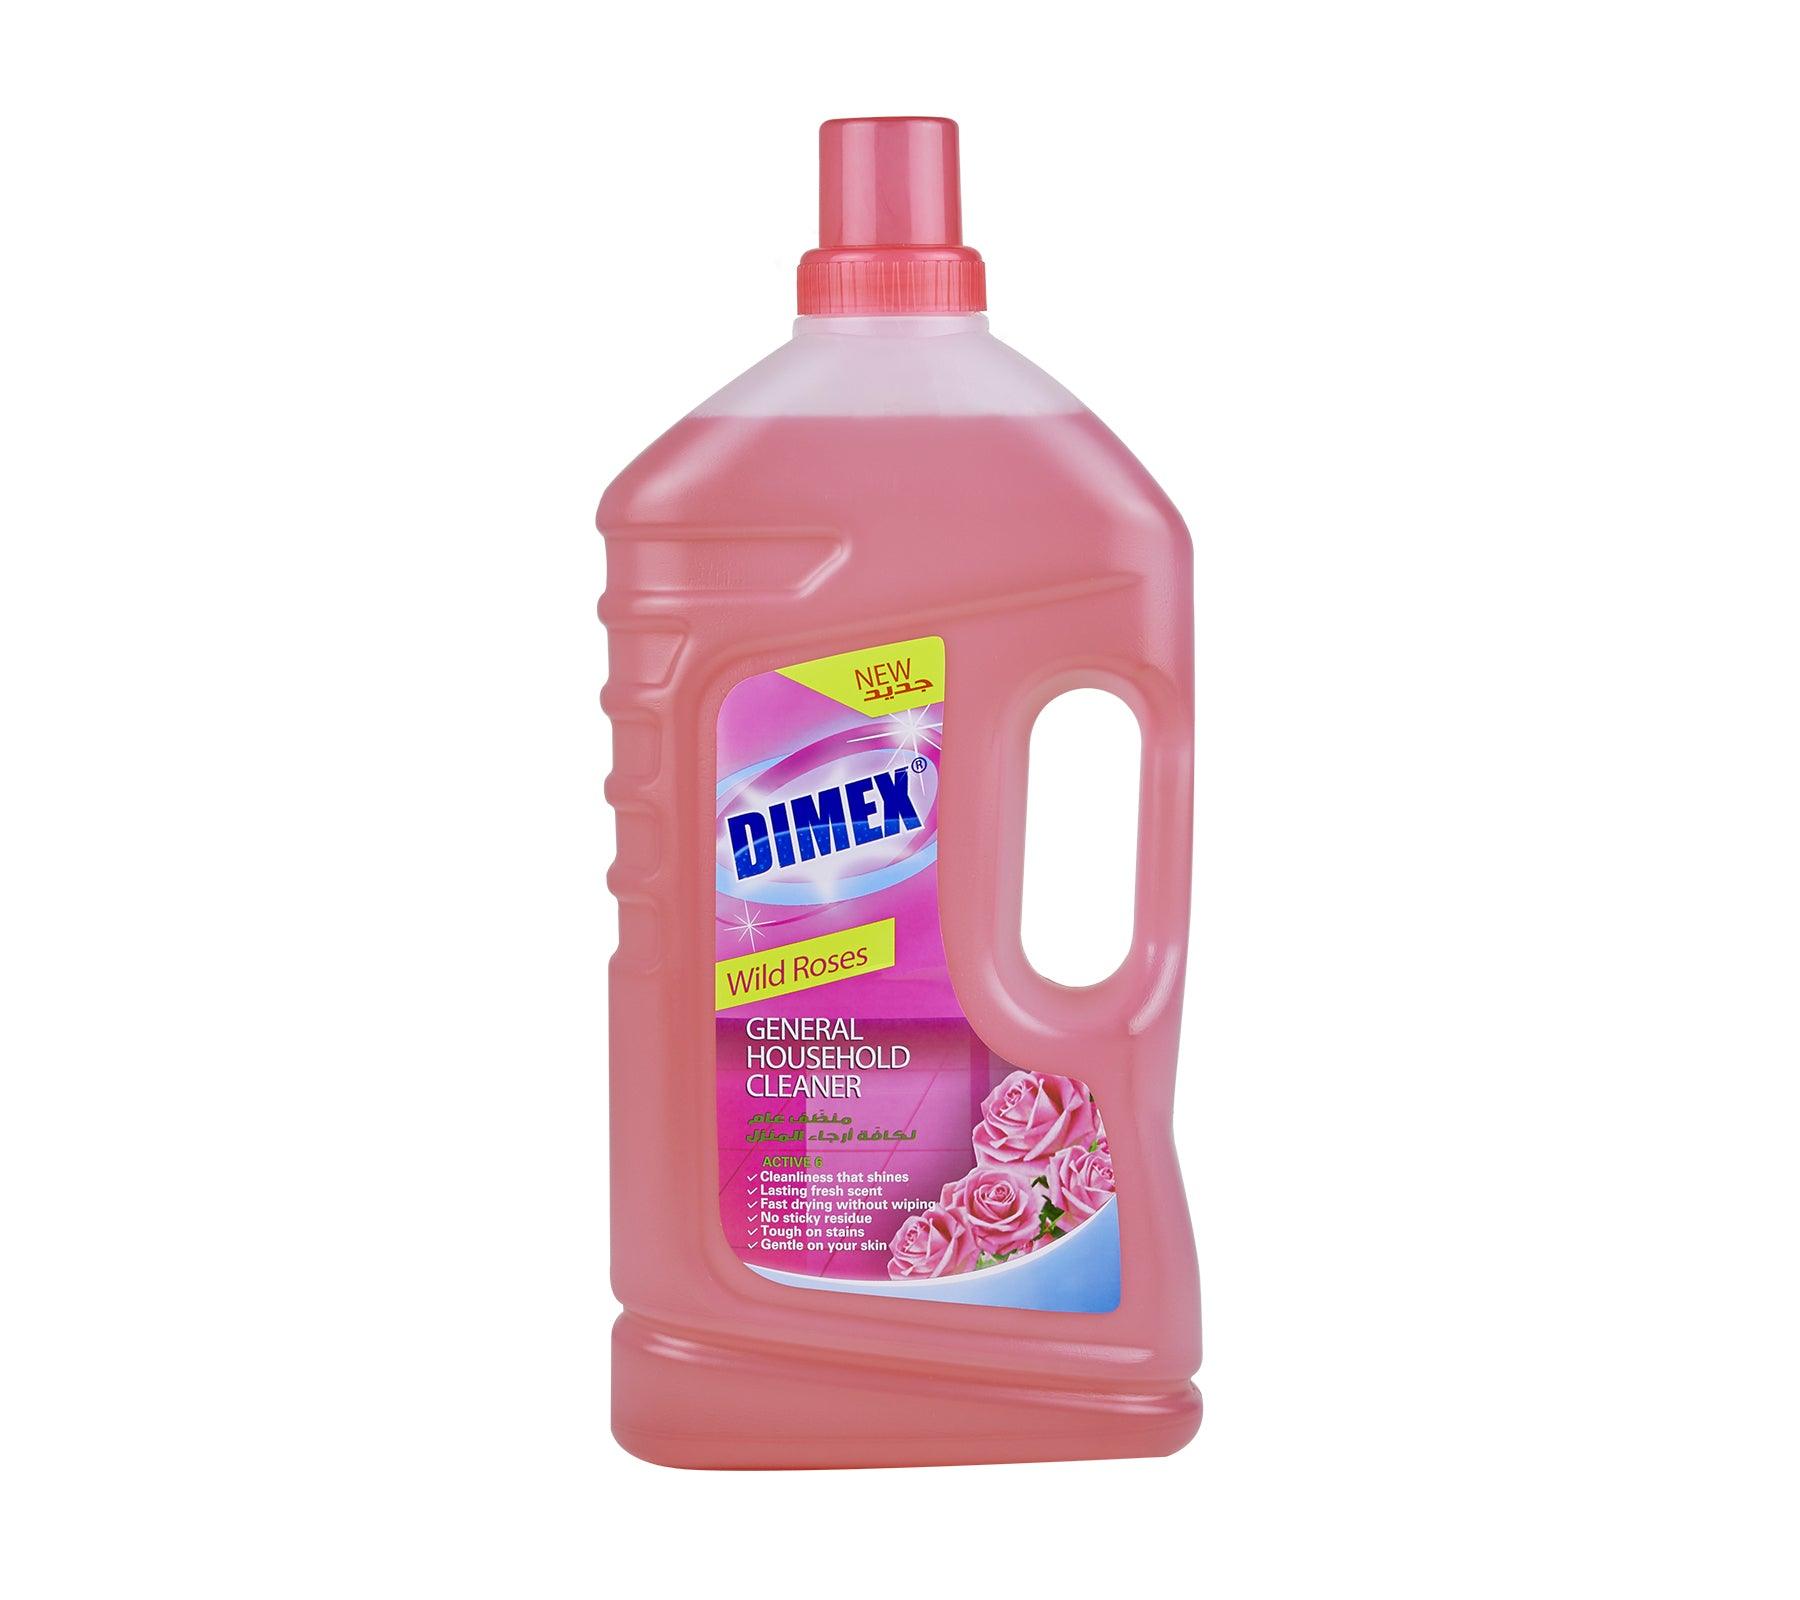 Elsada Dimex General Household Cleaner Wild Rose 800ml - Karout Online -Karout Online Shopping In lebanon - Karout Express Delivery 